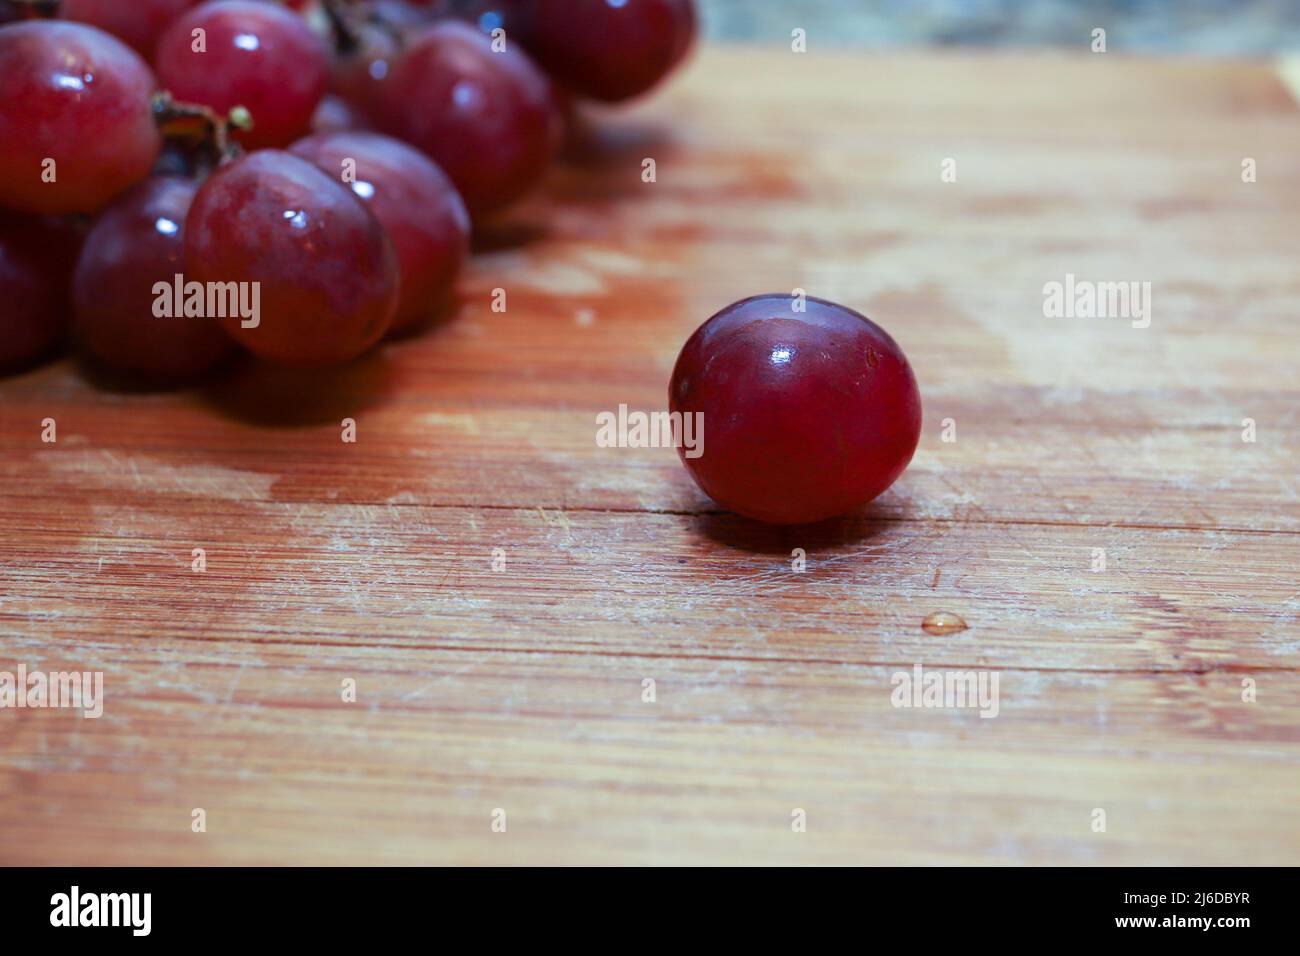 A close-up of a fresh organic red grape on a table Stock Photo